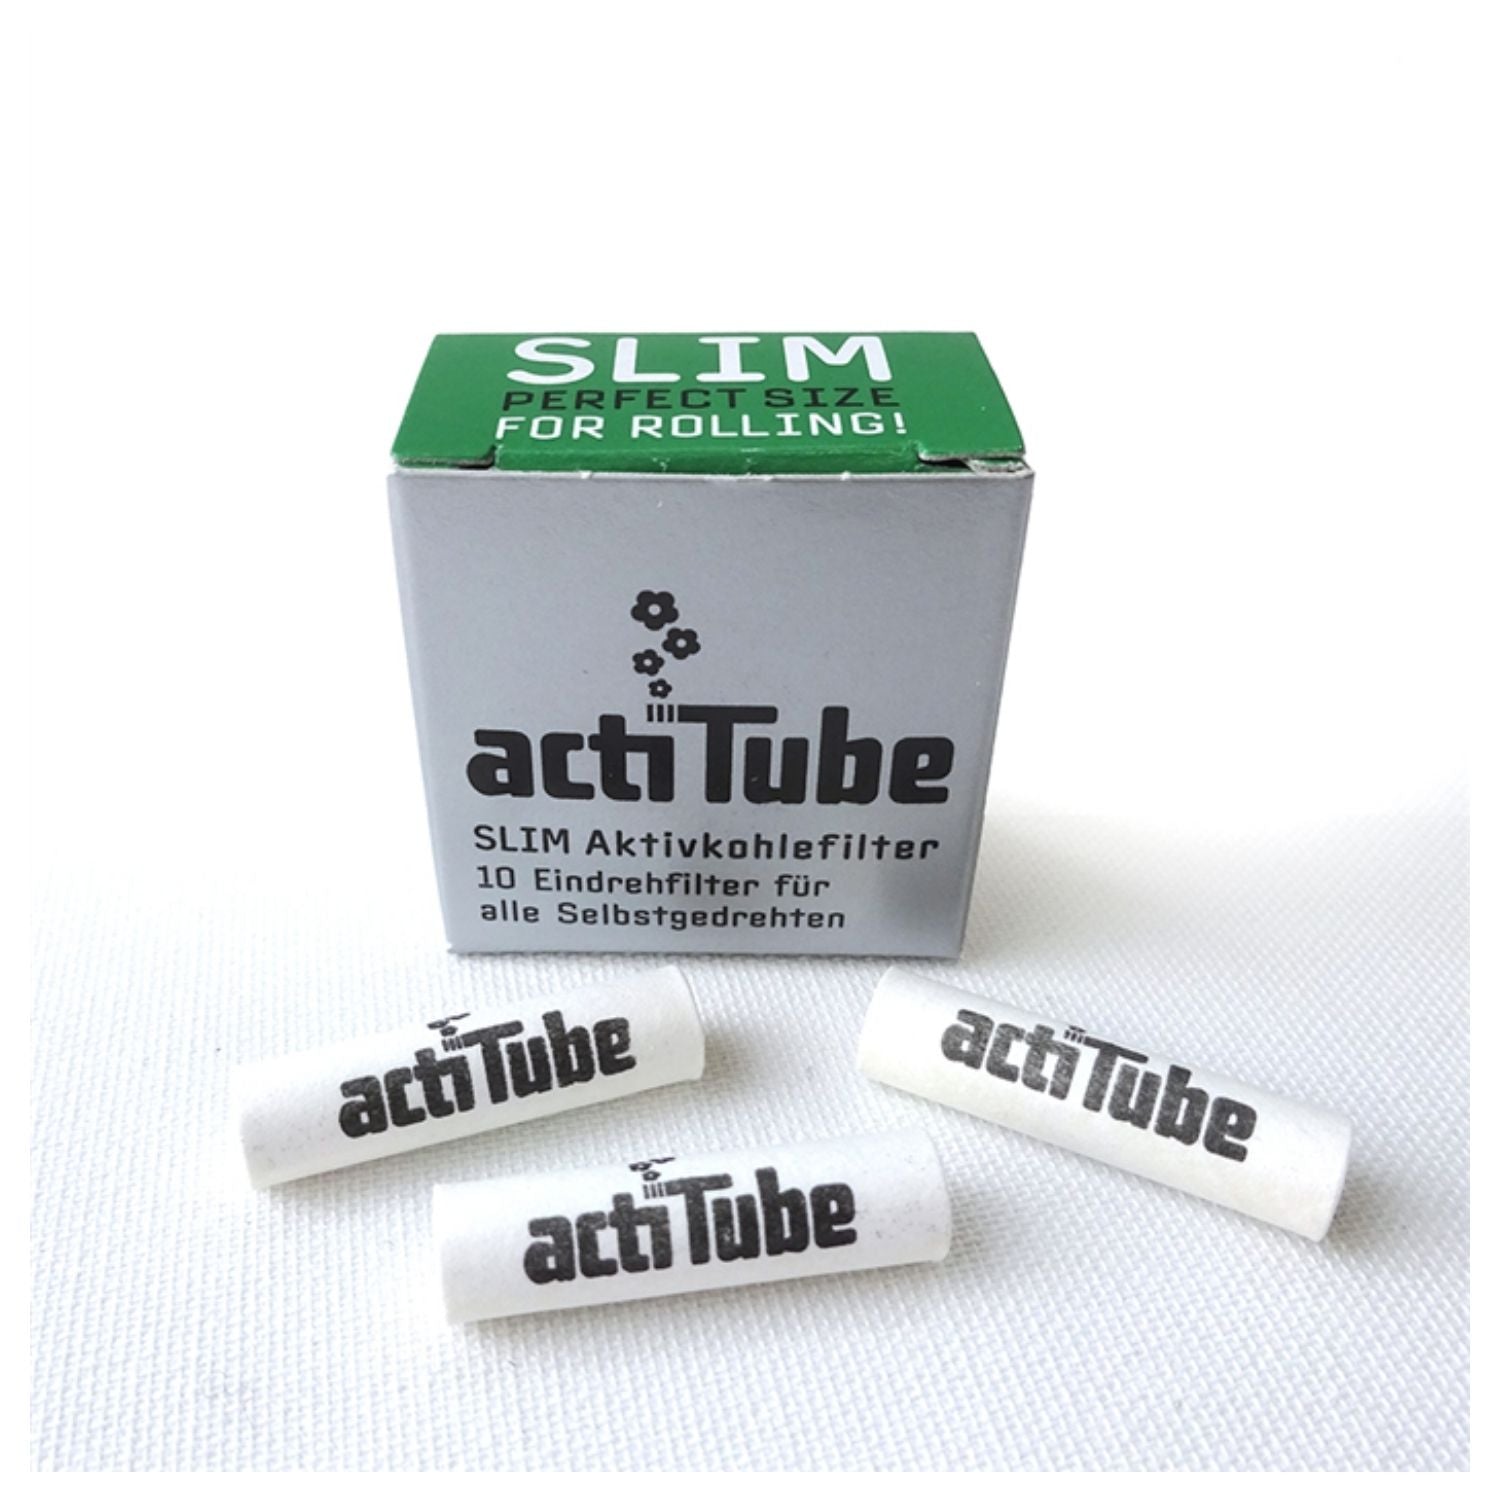 ActiTube Activated Charcoal Slim Filters - 10 Tips